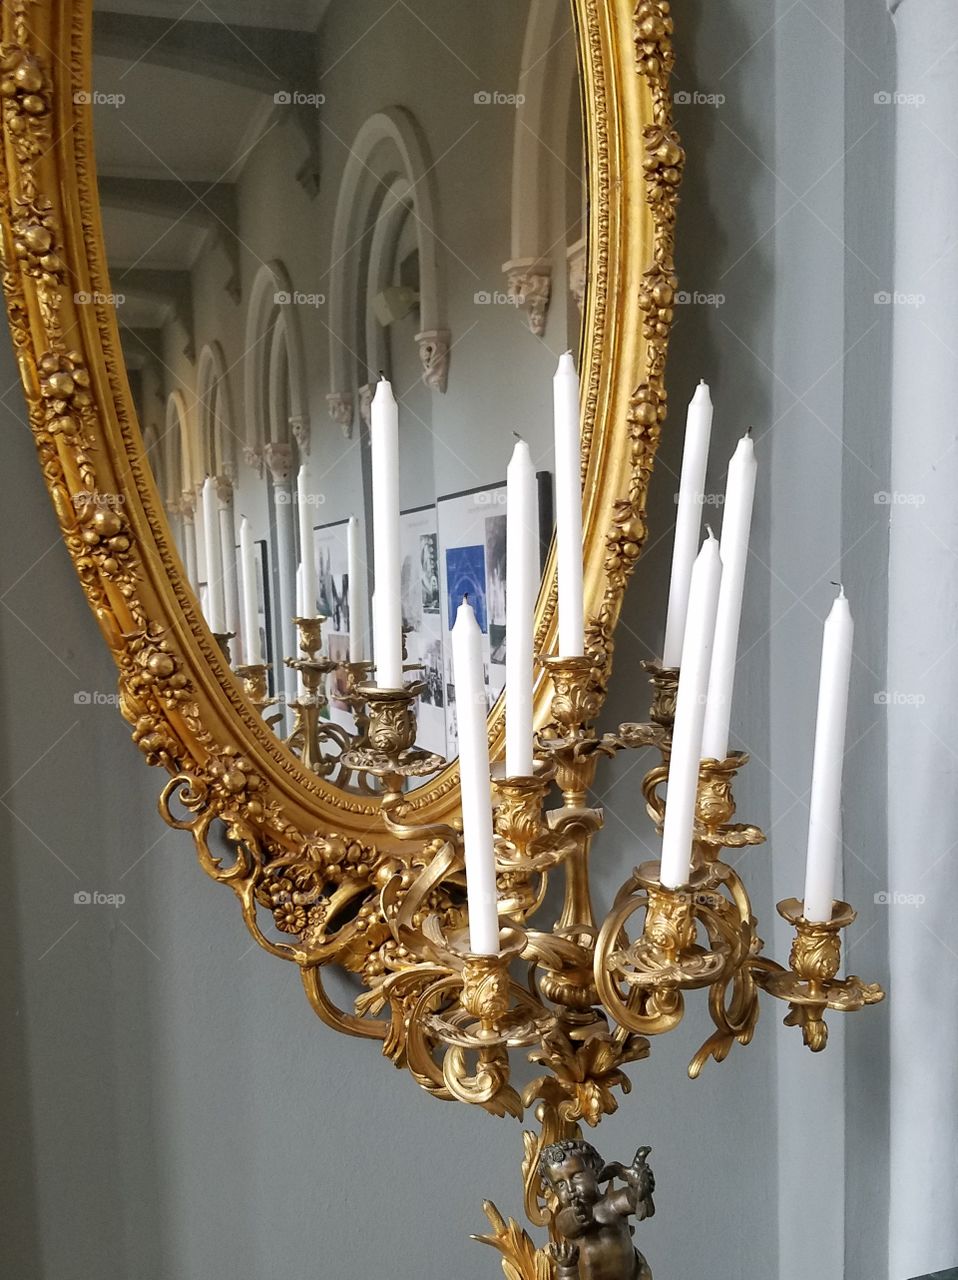 Mirrored candles in The Smithsonian Castle